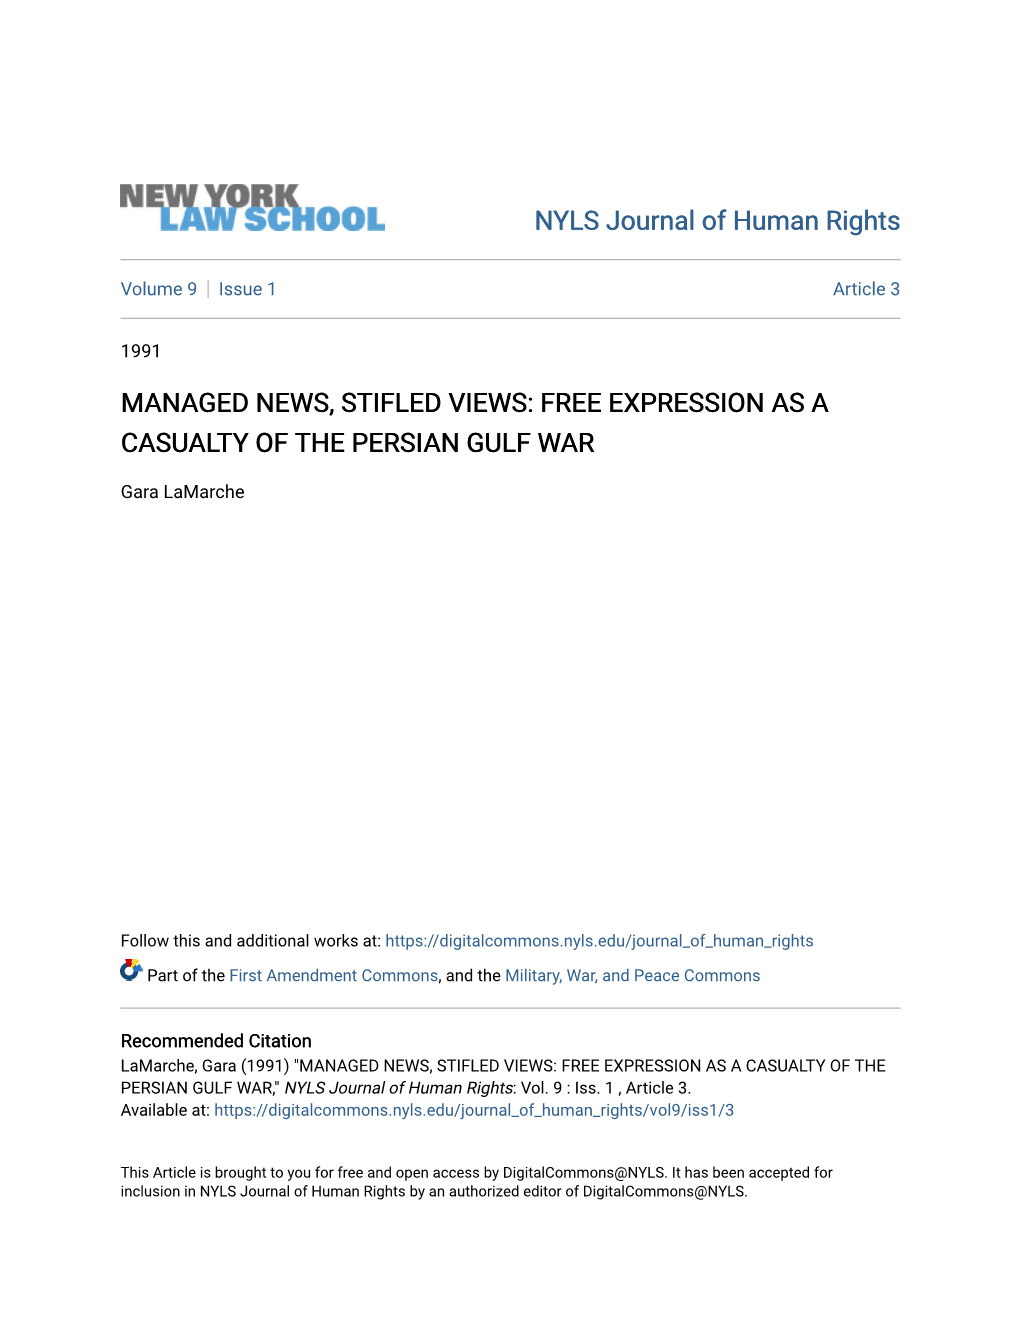 Managed News, Stifled Views: Free Expression As a Casualty of the Persian Gulf War